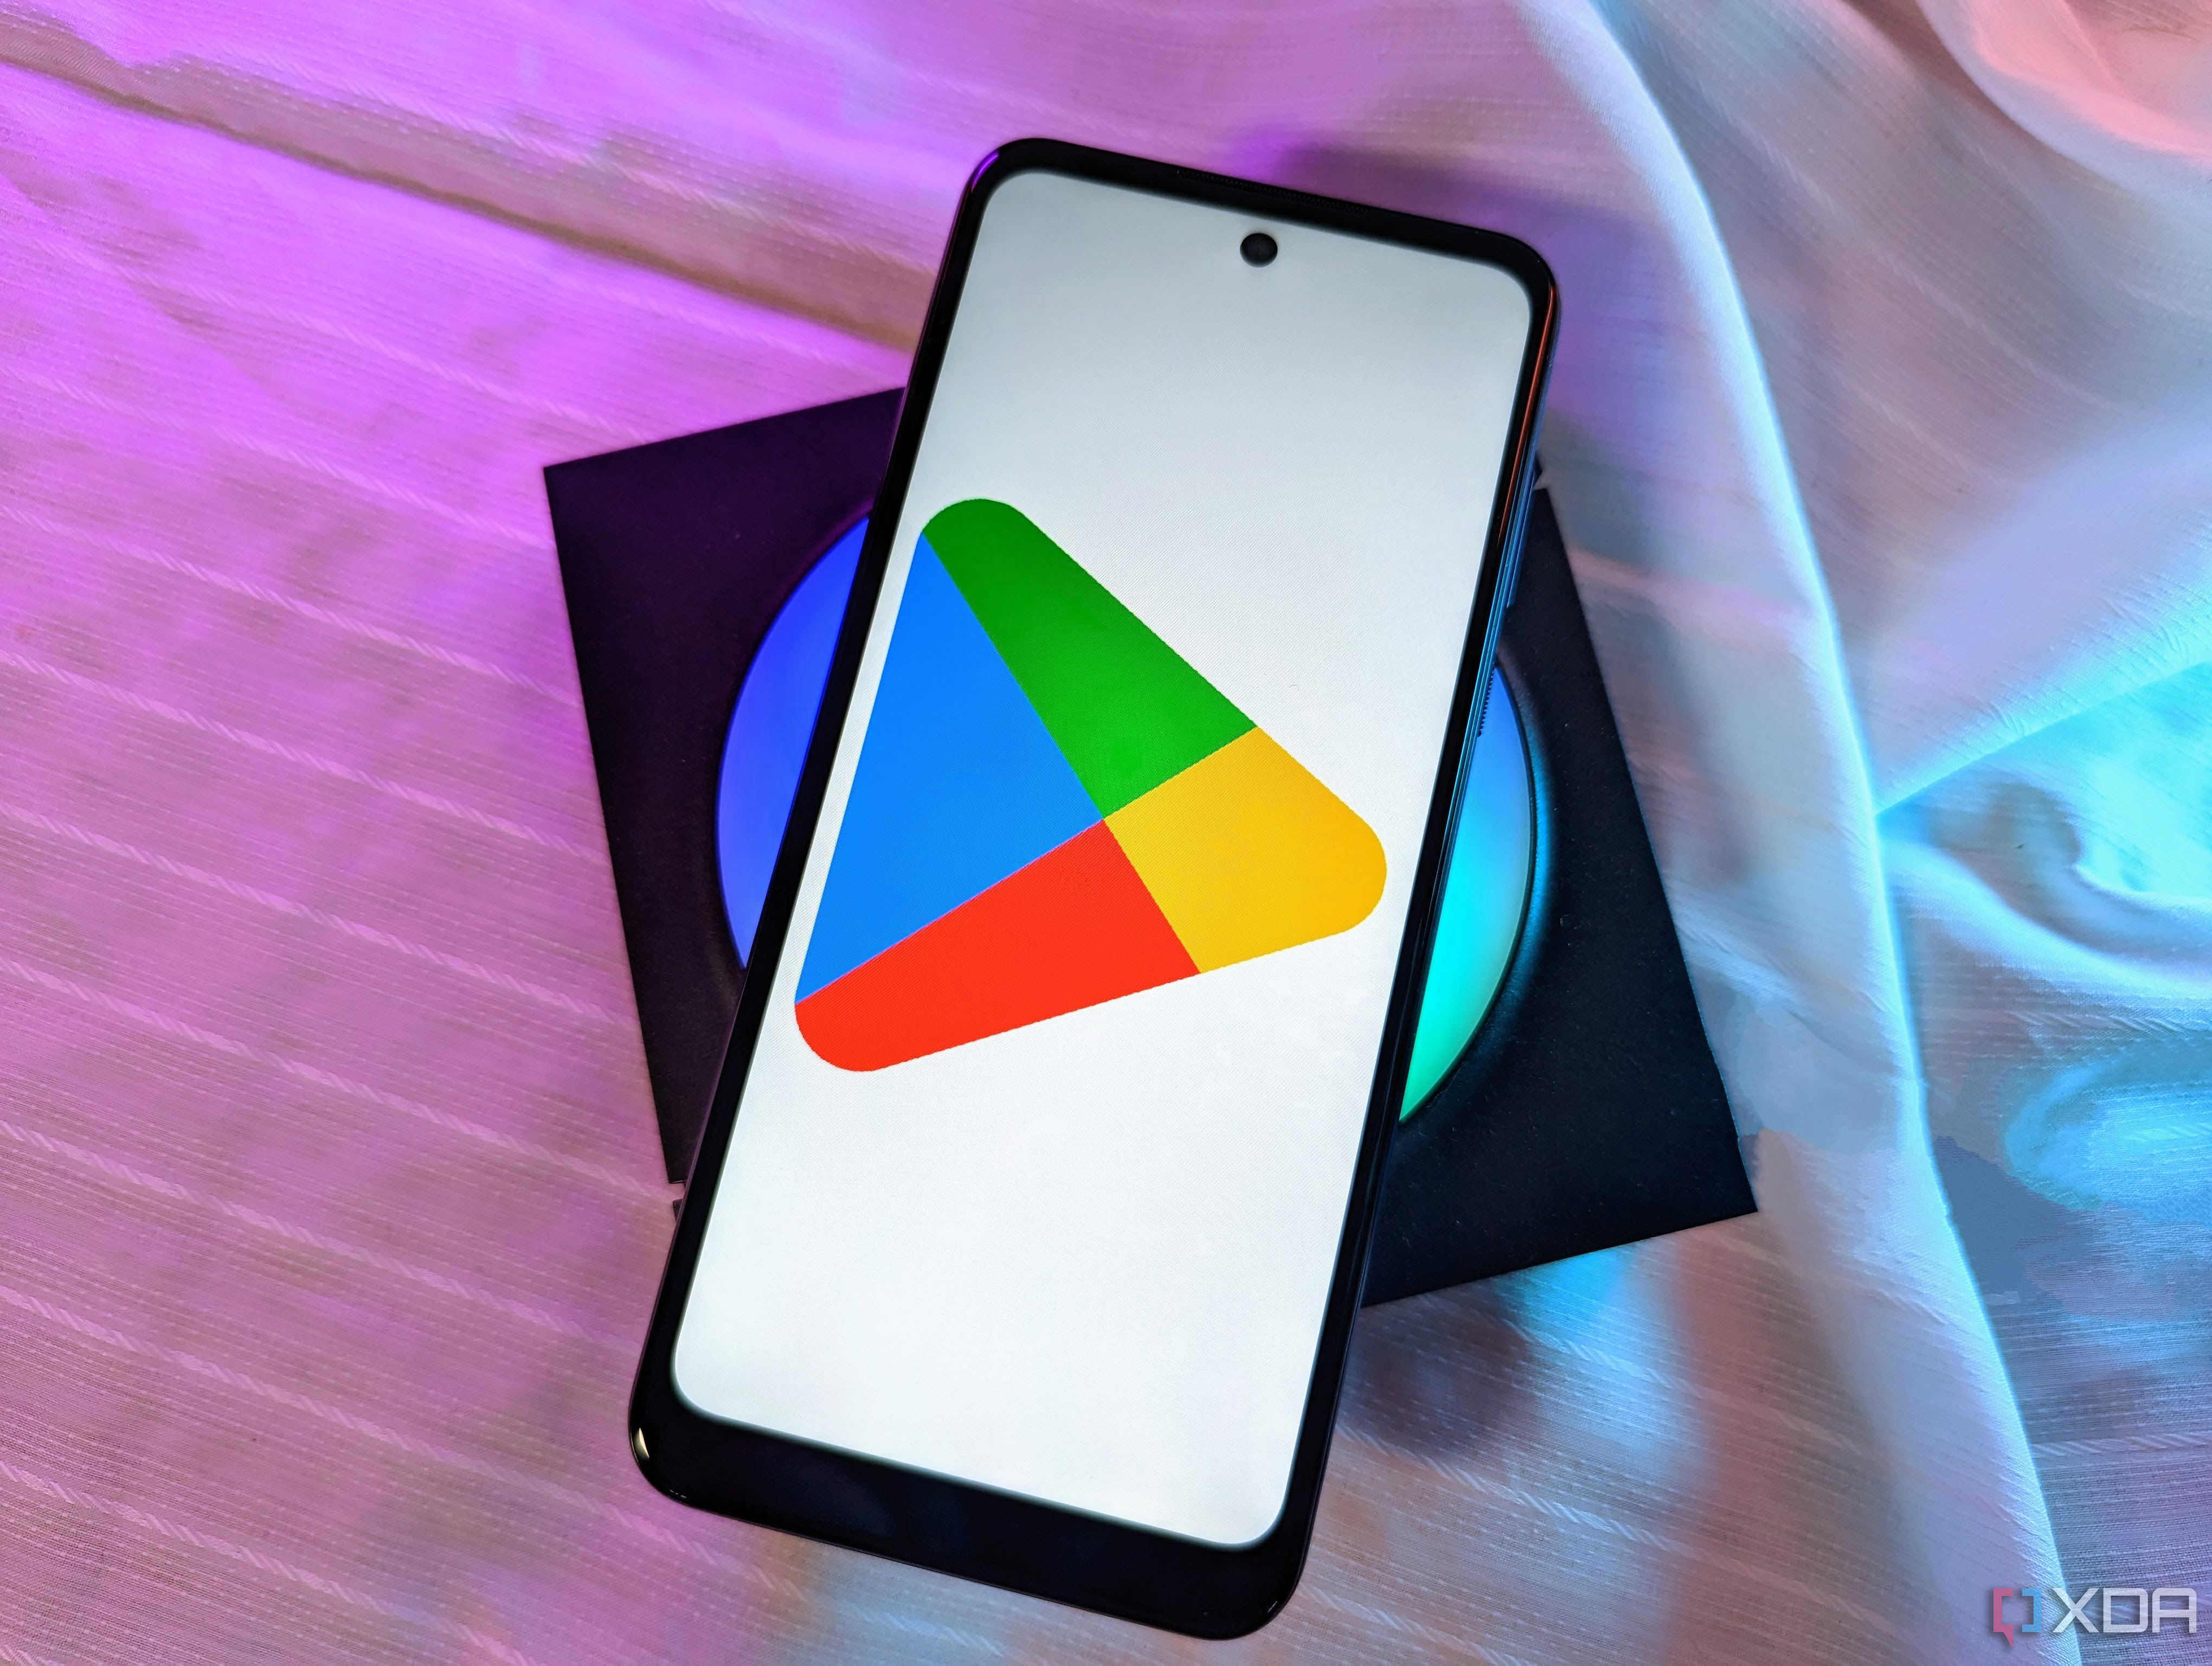 Play Store won't open, load, or download apps? Here's how to fix